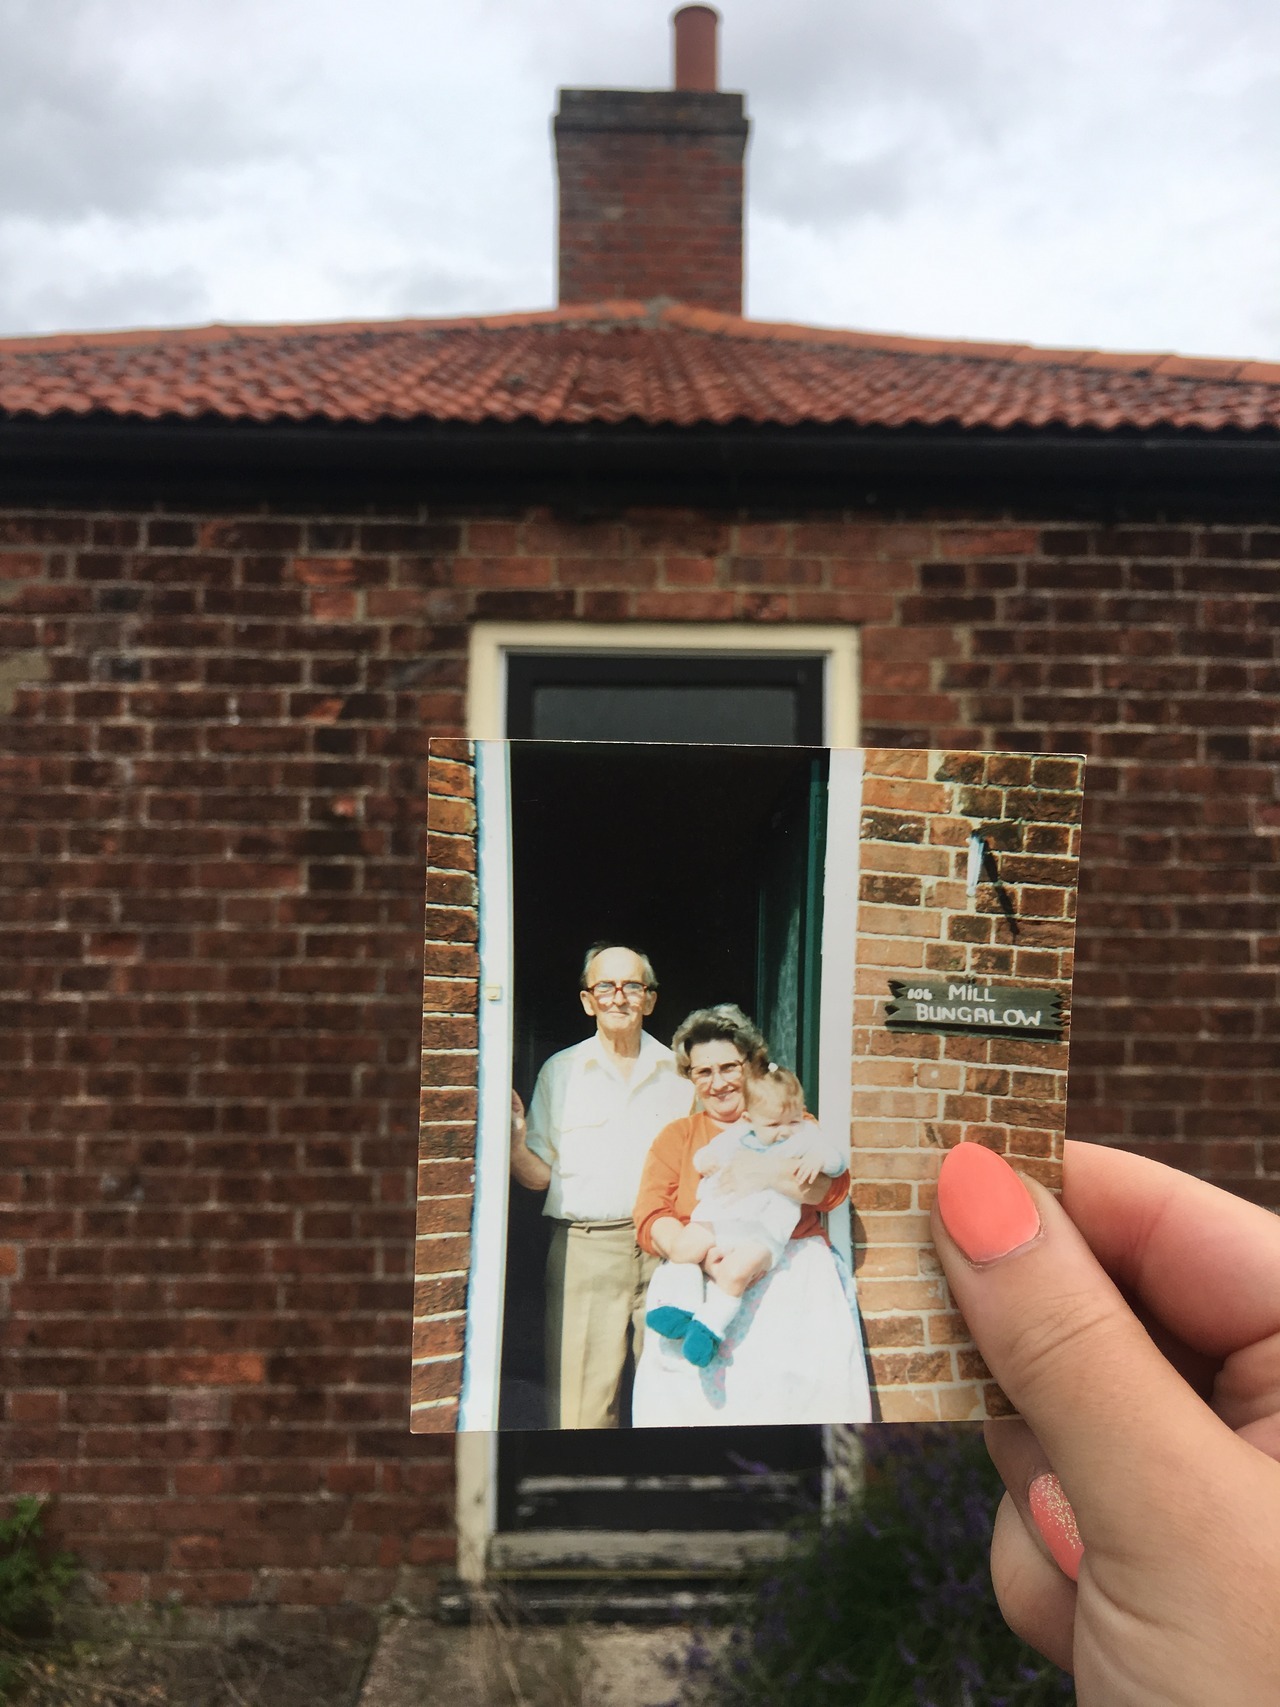 Dear Photograph, Just shy of 27 years ago, this very precious photograph was taken. A little over a month after this was taken my dear Gramps sadly passed away - I was only 8 months old. 19 years on and we lost our dear Nan, this home was filled with...